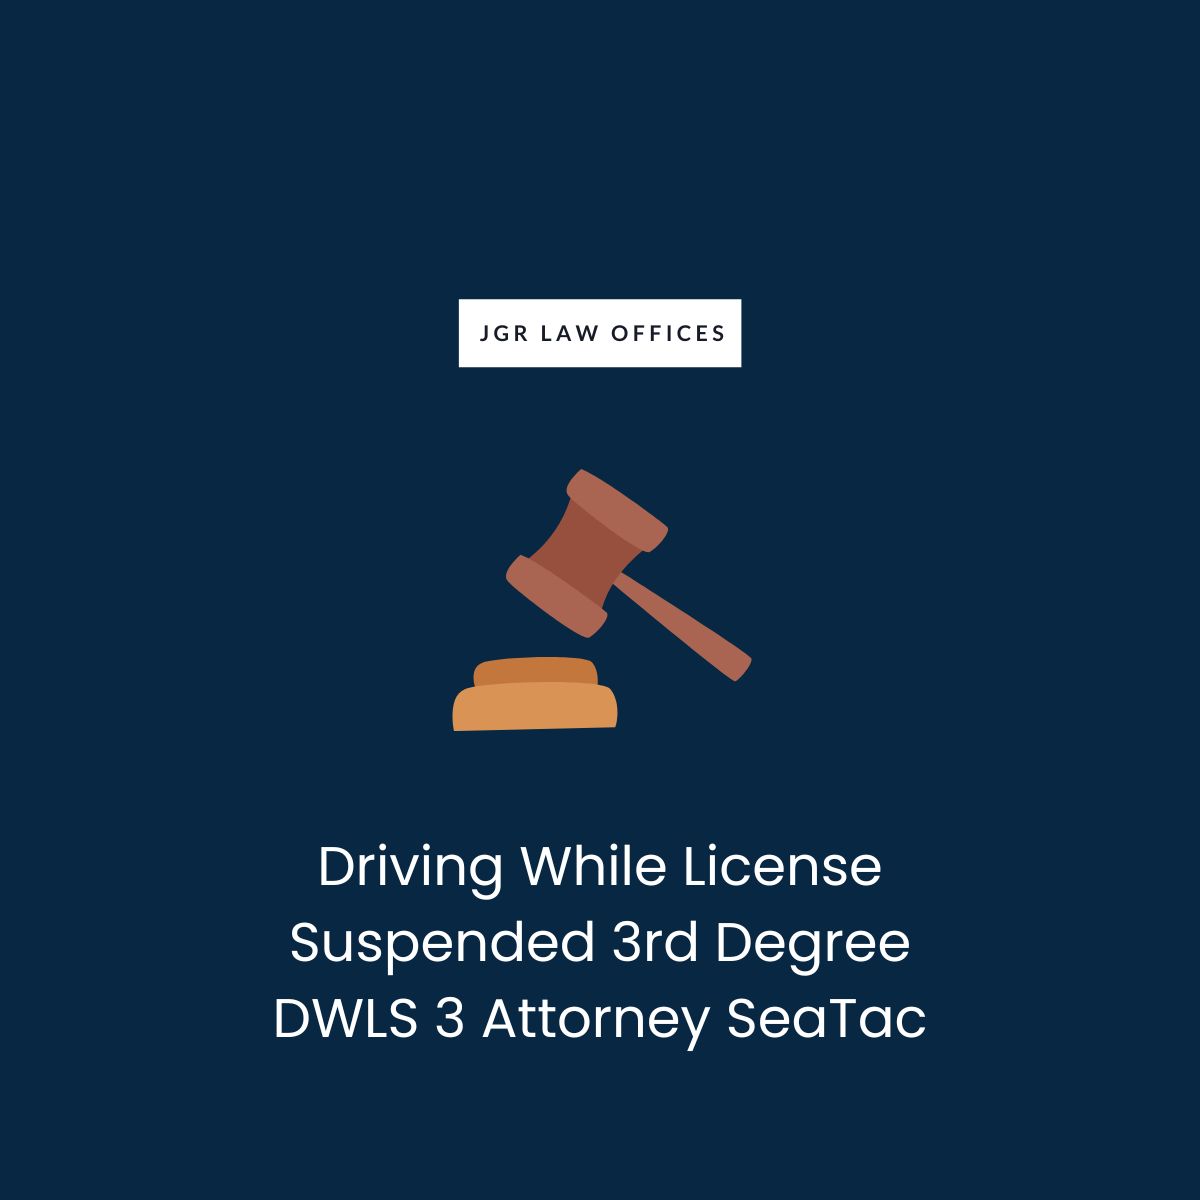 Driving While License Suspended 3rd Degree DWLS 3 Lawyer SeaTac Driving While License Suspended 3rd Degree DWLS 3